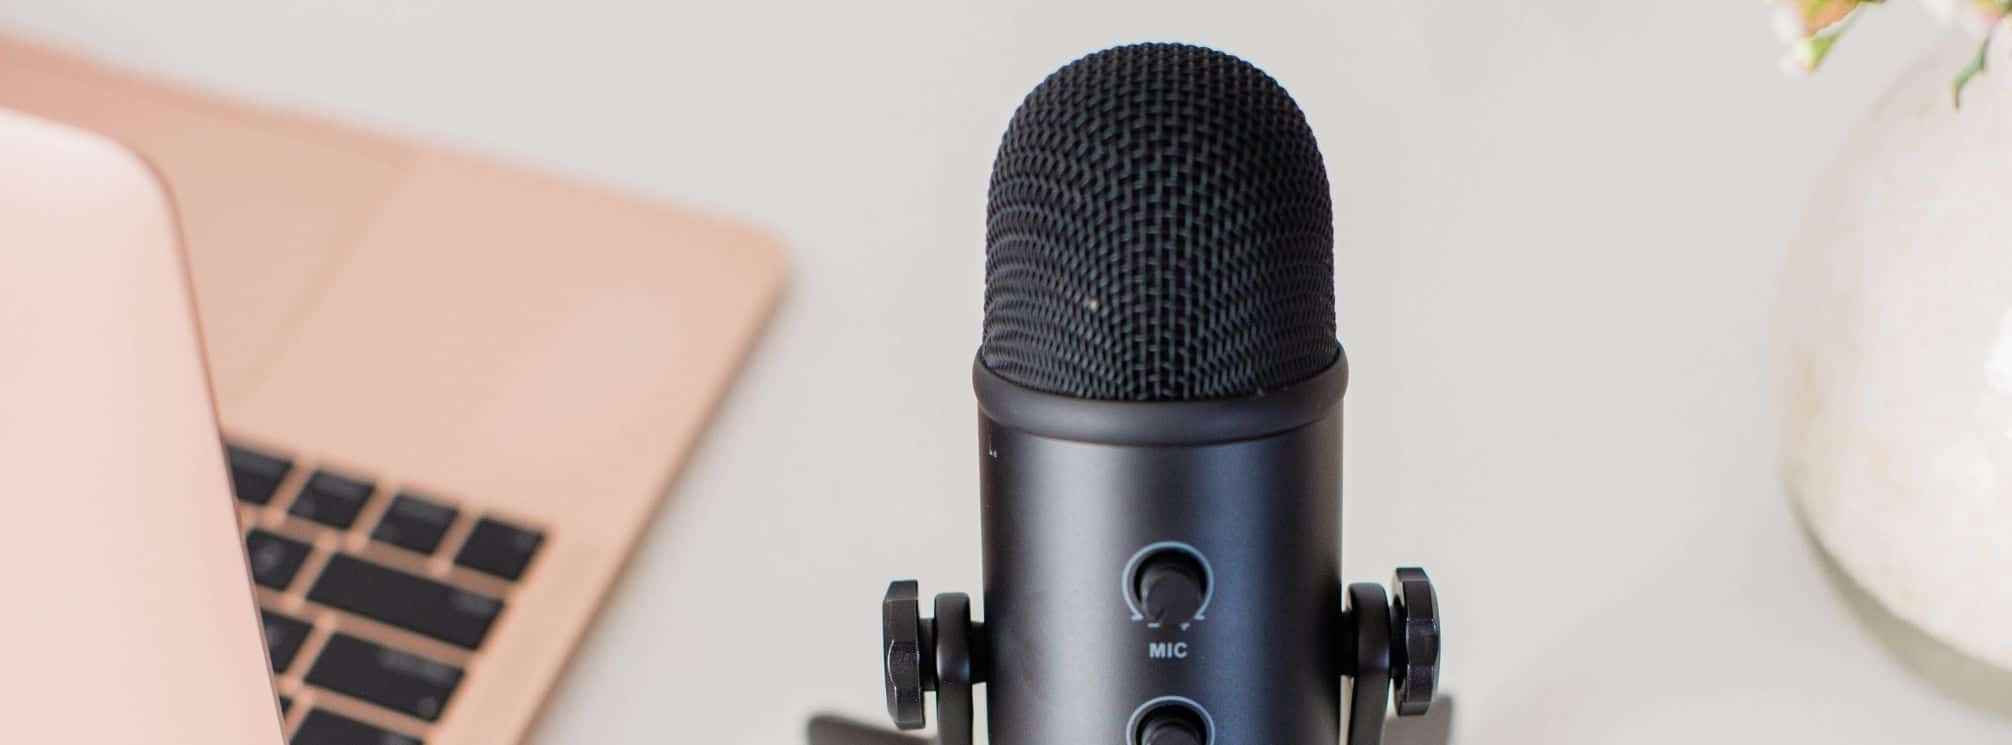 podcast microphone next to a pink Apple Macbook computer.